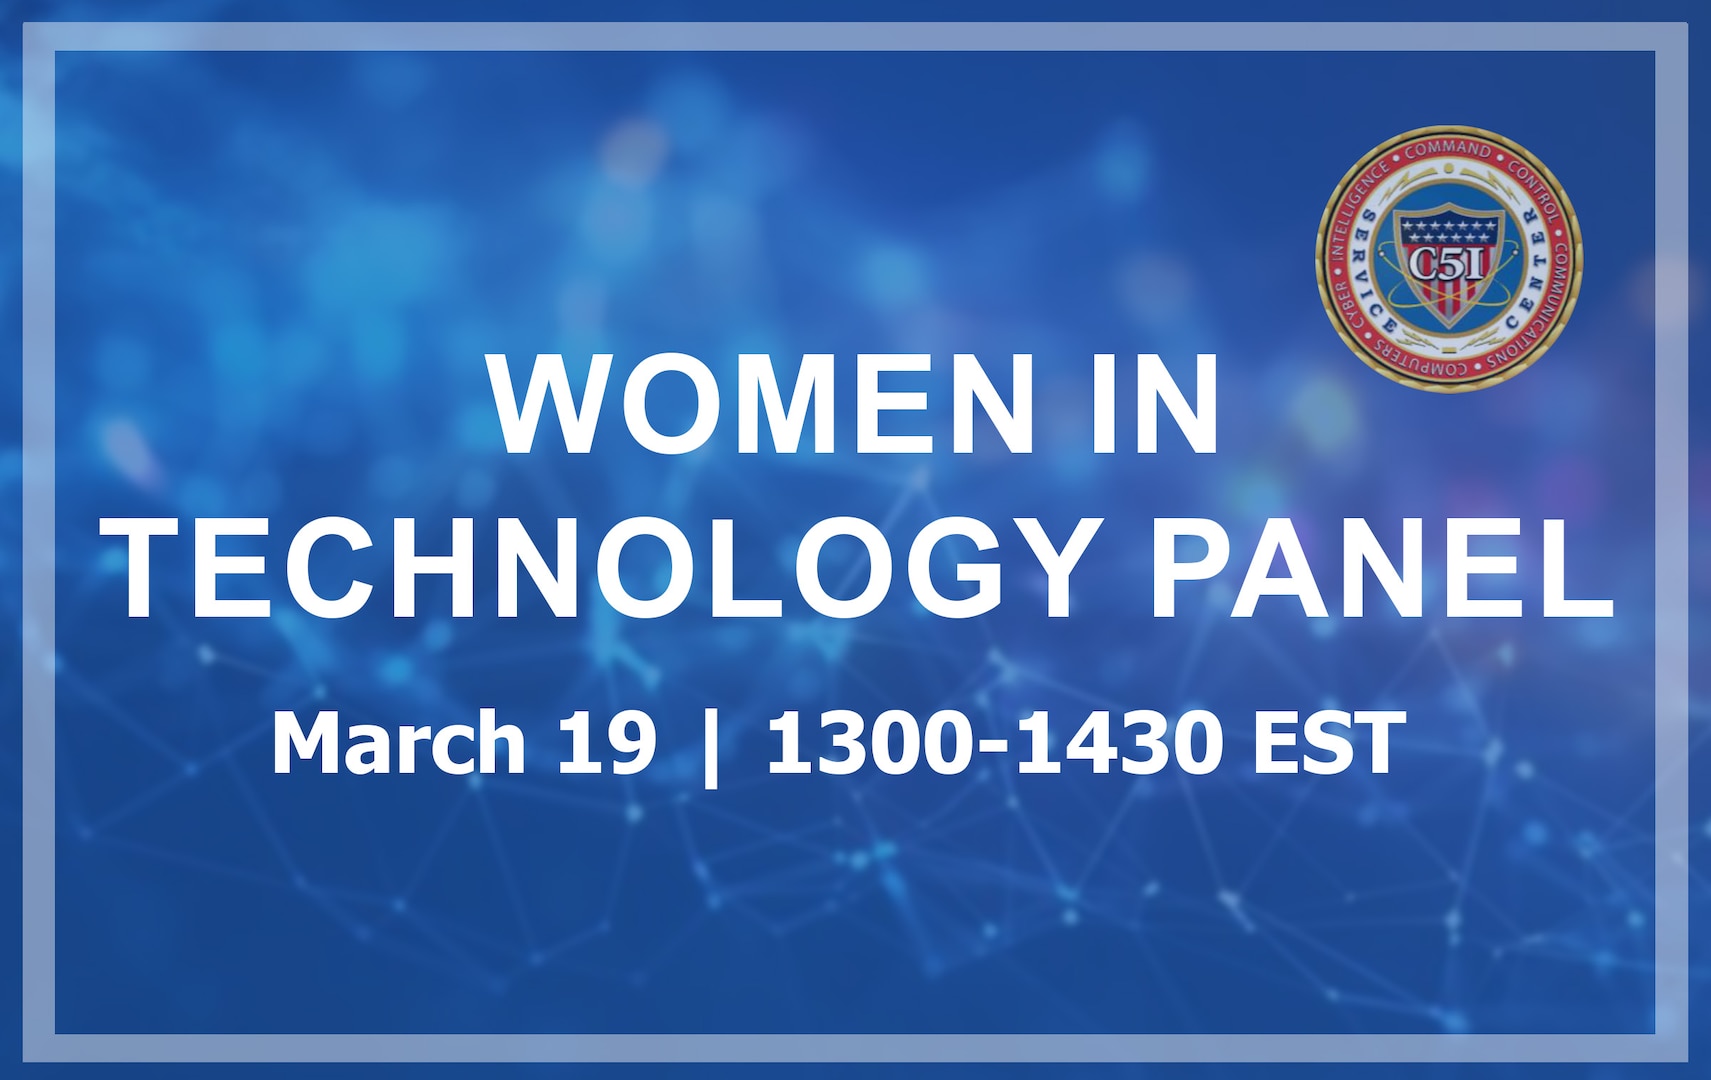 Panel on Women in Technology at the United States Coast Guard featured on My Coast Guard News